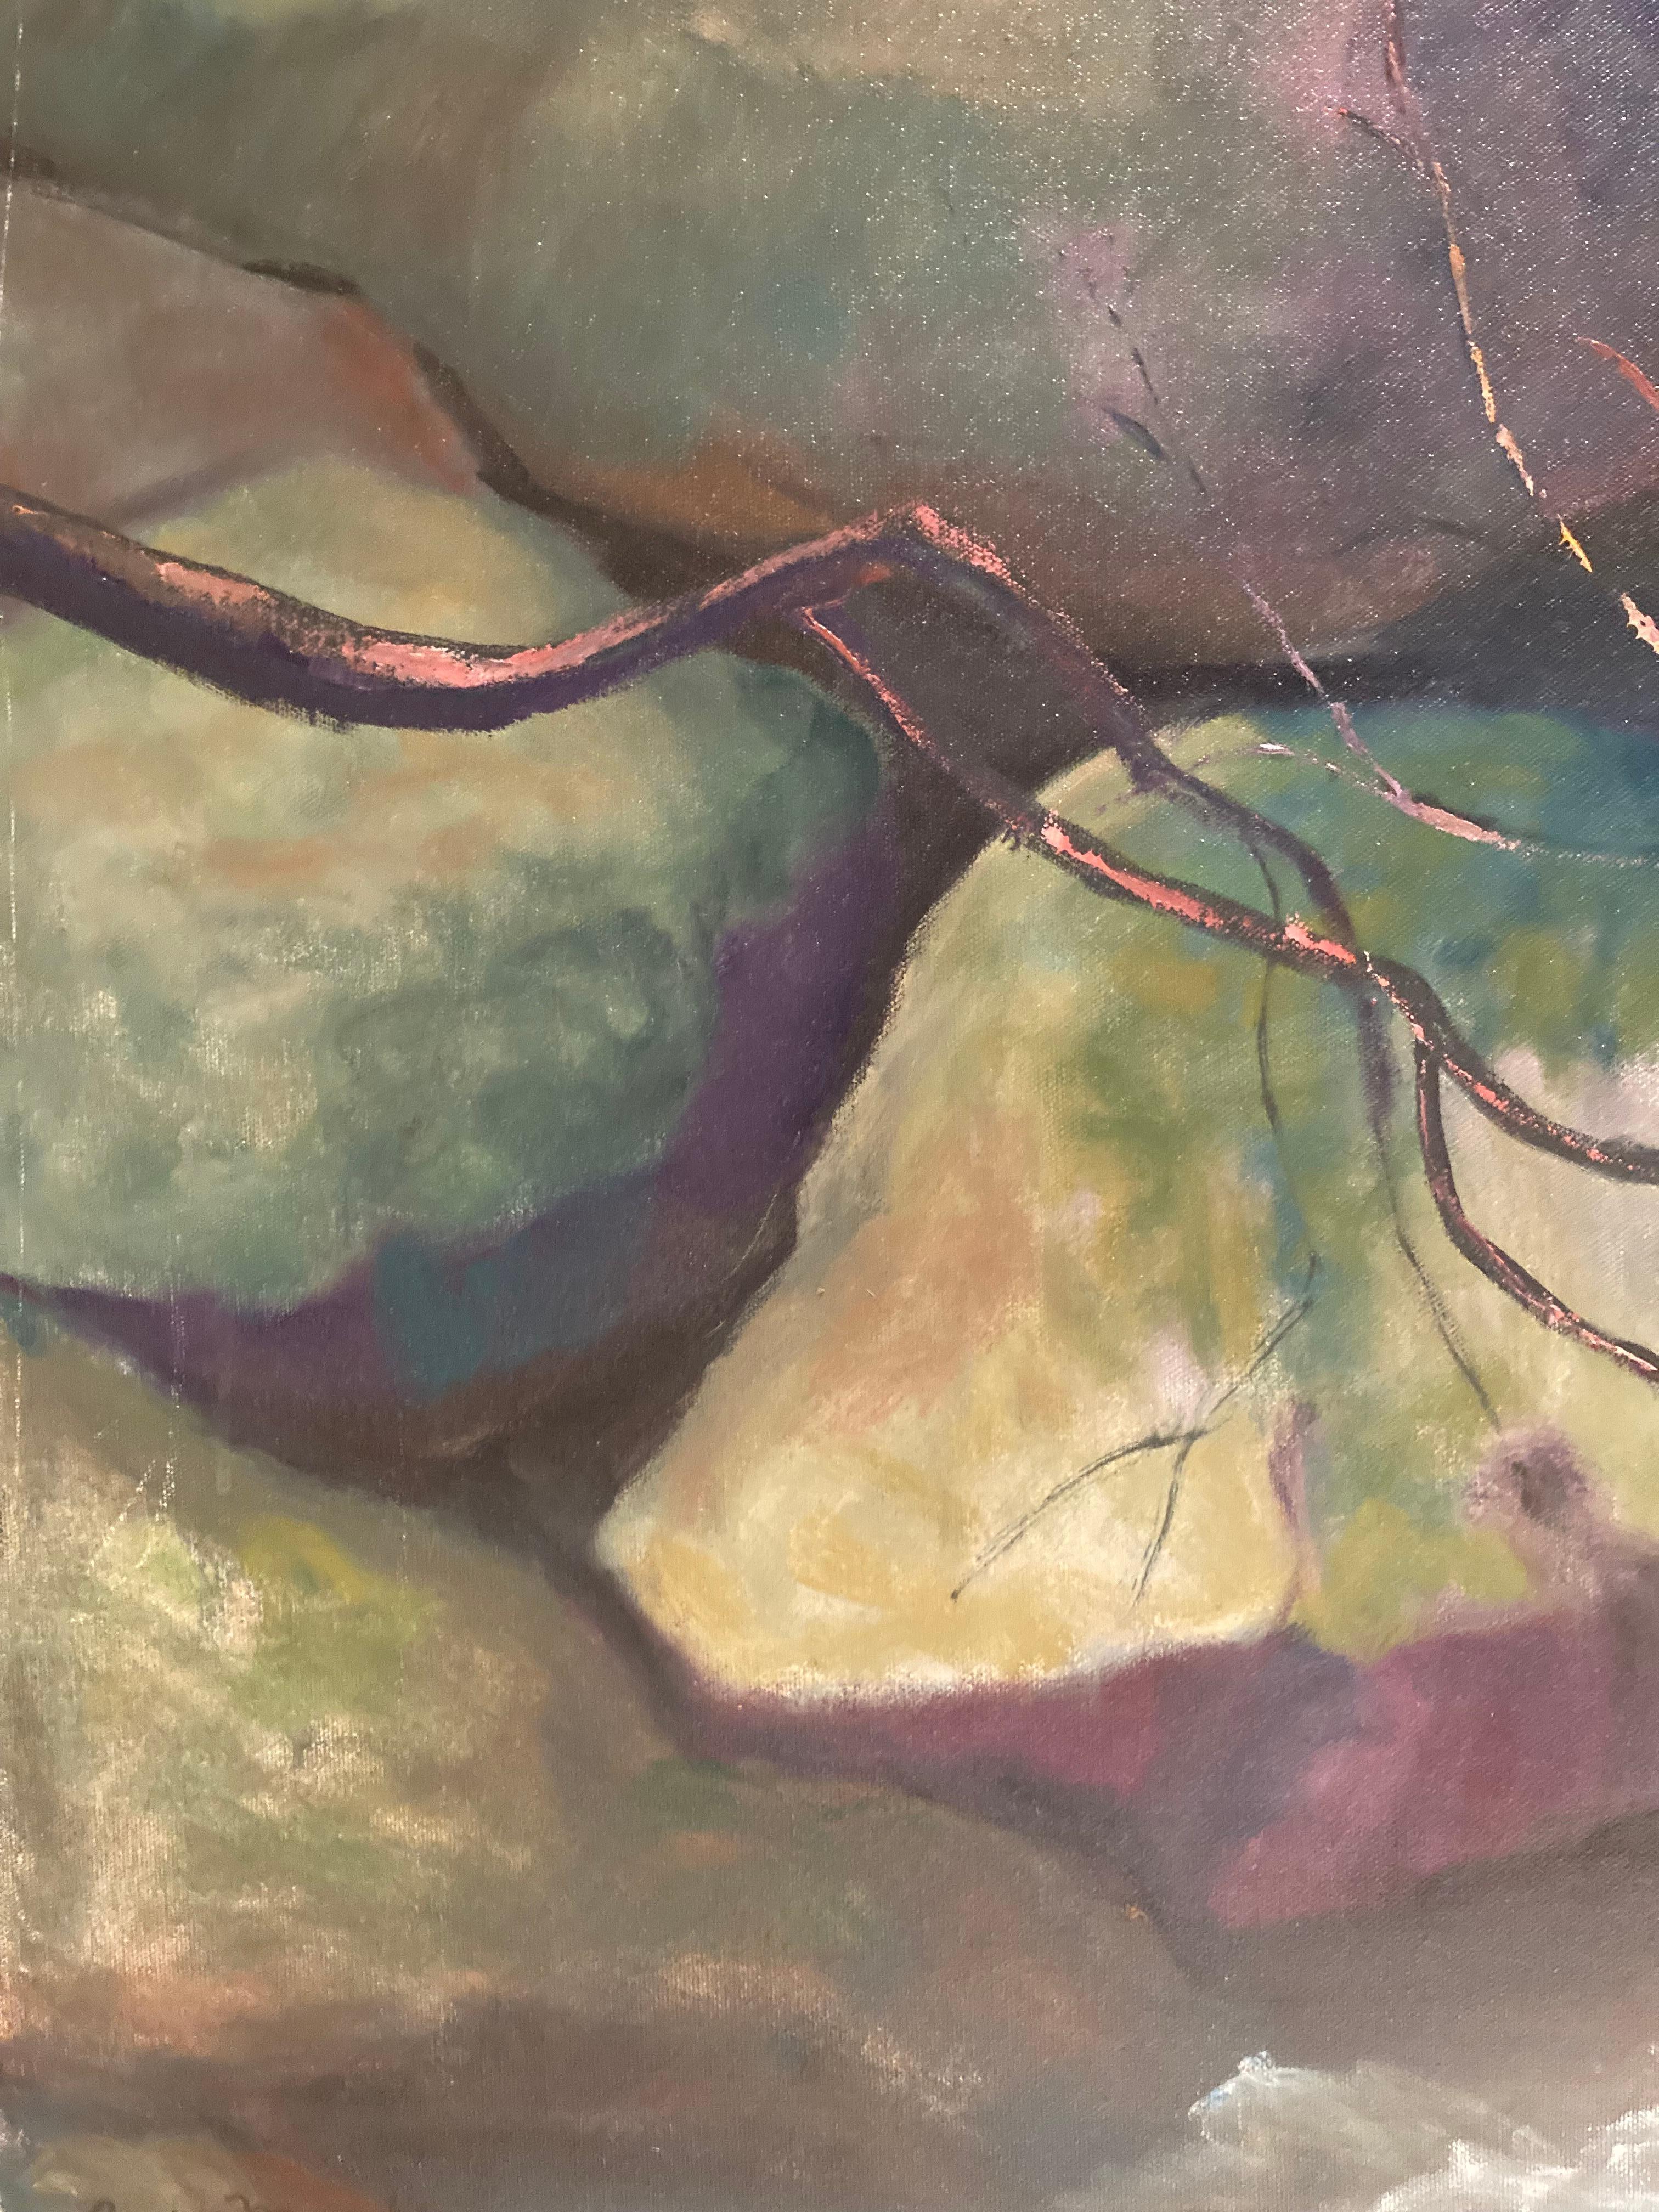 This oil on canvas painting by Regina Murphy gives the viewer a closeup view of mountain boulders and rocks in a mountain stream with craggy branches that have become snarled in the movement of the water.  The branches vibrate with fuchsia color in